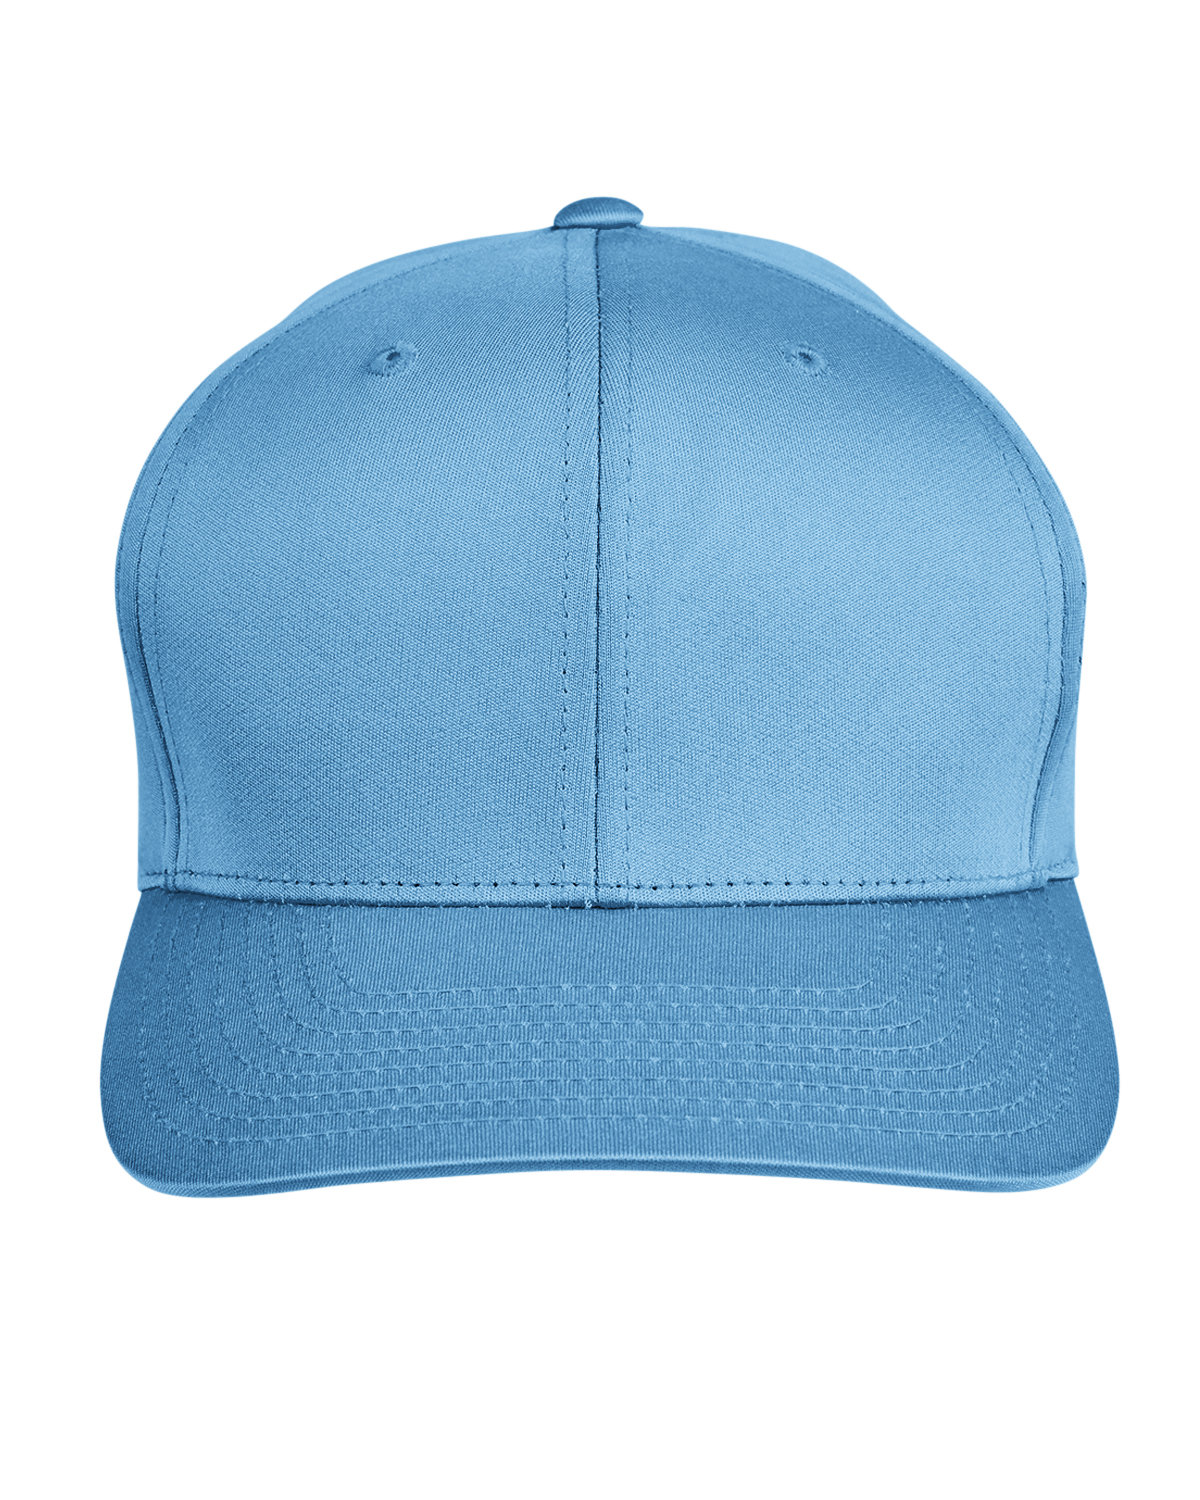 Team 365 by Yupoong® Adult Zone Performance Cap SPORT LIGHT BLUE 